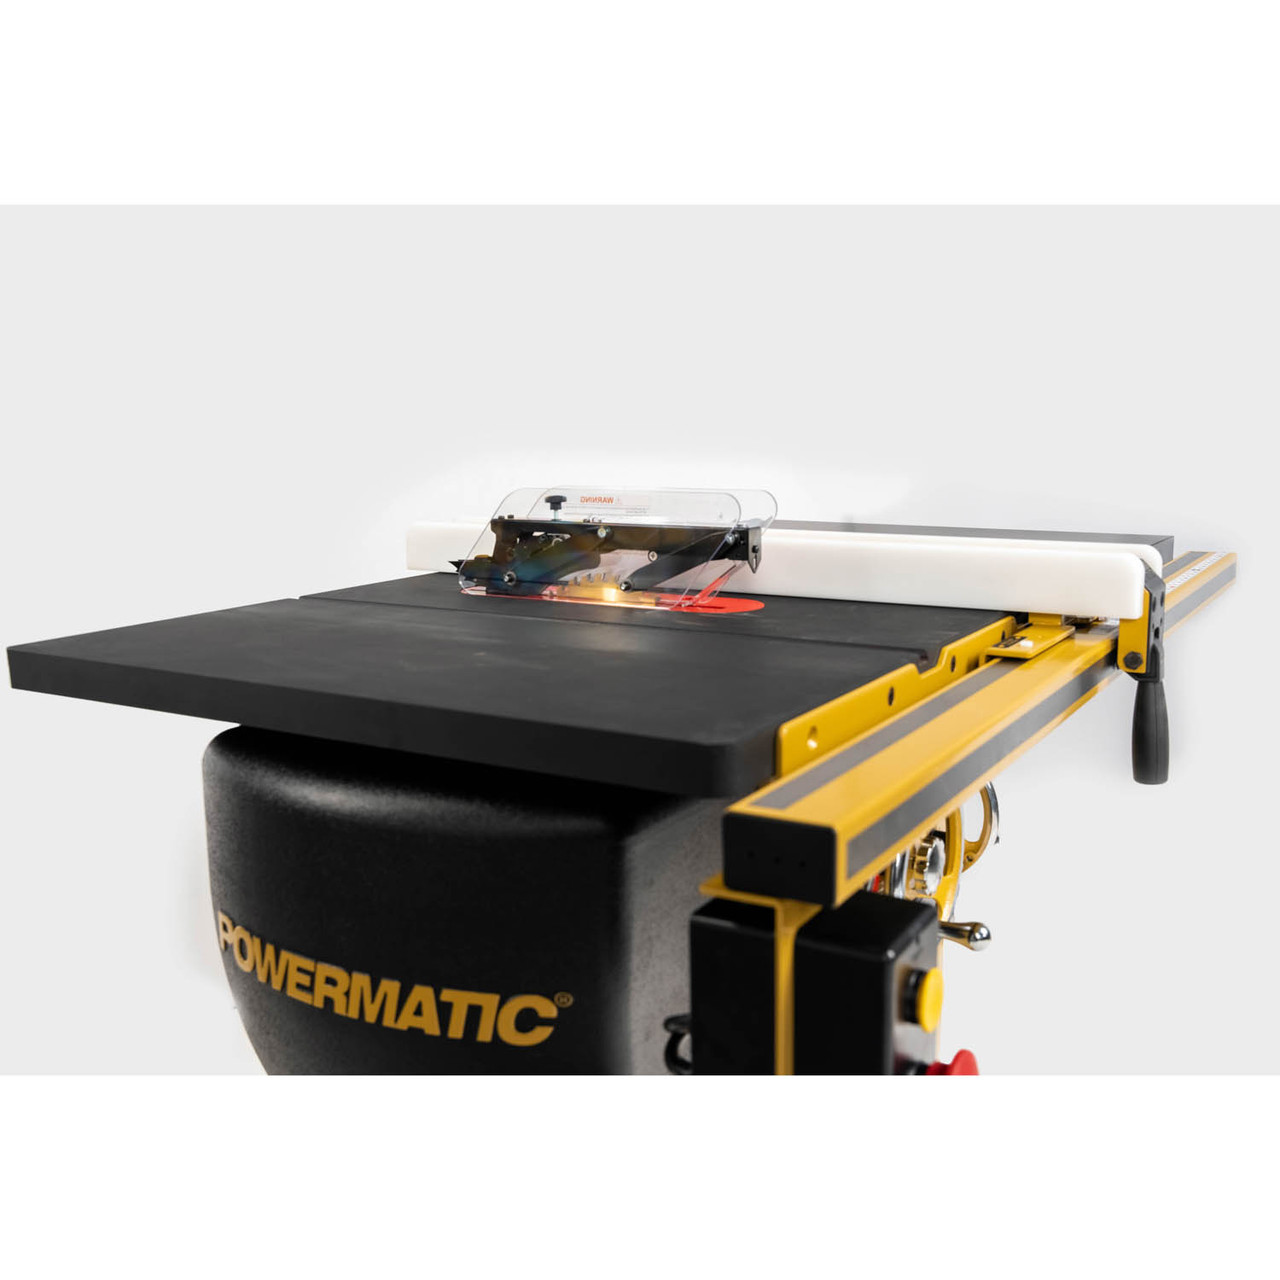 Powermatic, PM1-PM23130KT, PM2000T 10" Table Saw with ArmorGlide, 3HP 1PH 230V, 30" RIP